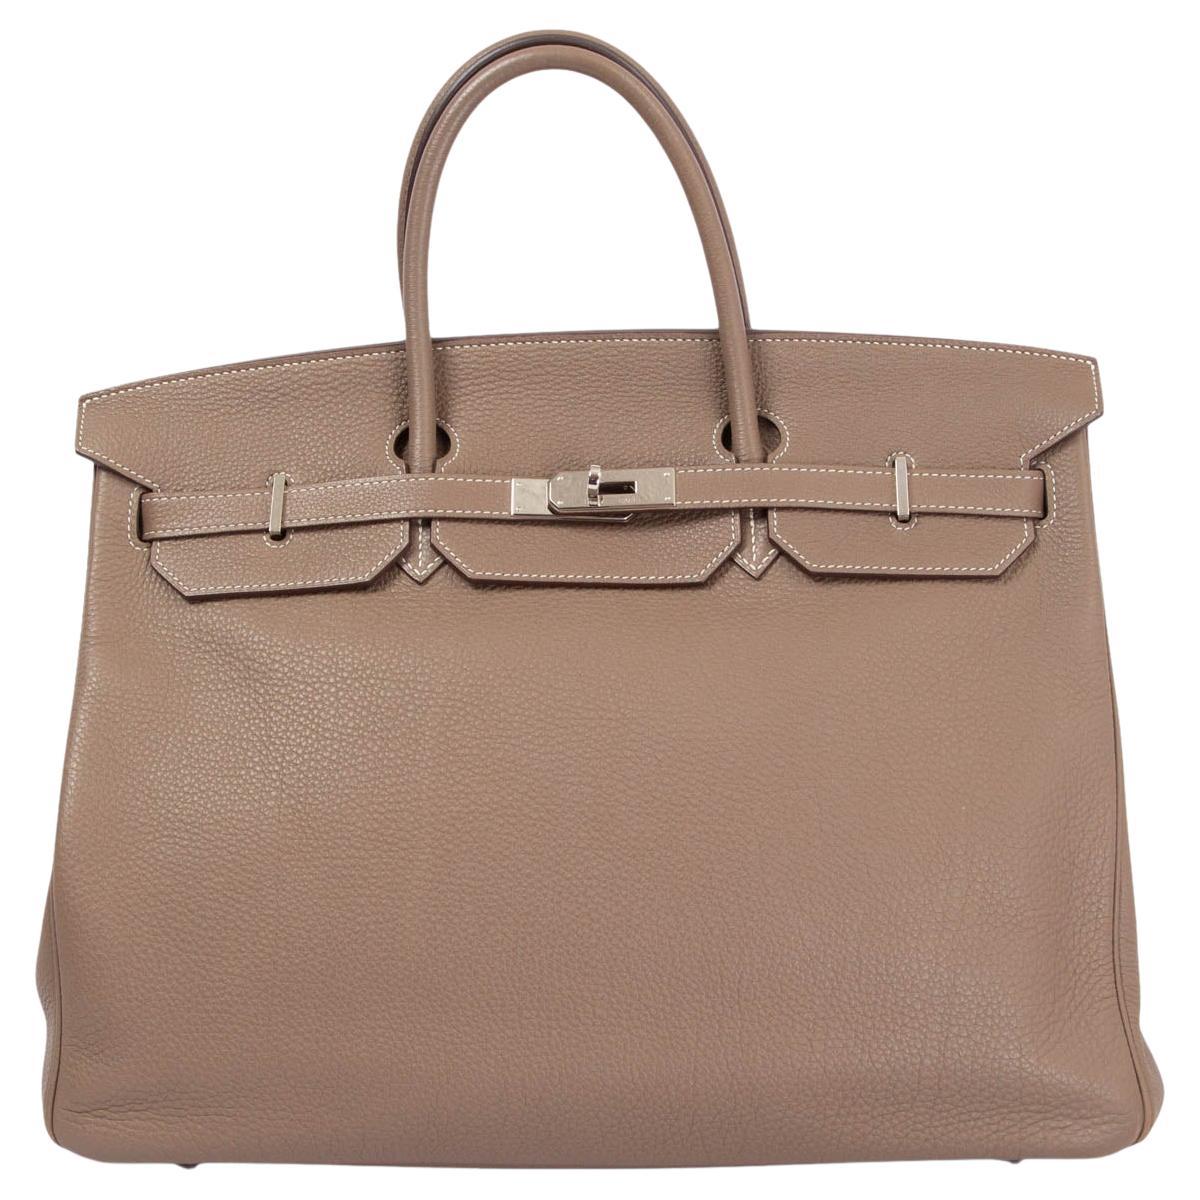 HERMES Etoupe taupe Togo leather BIRKIN 40 Bag Phw For Sale